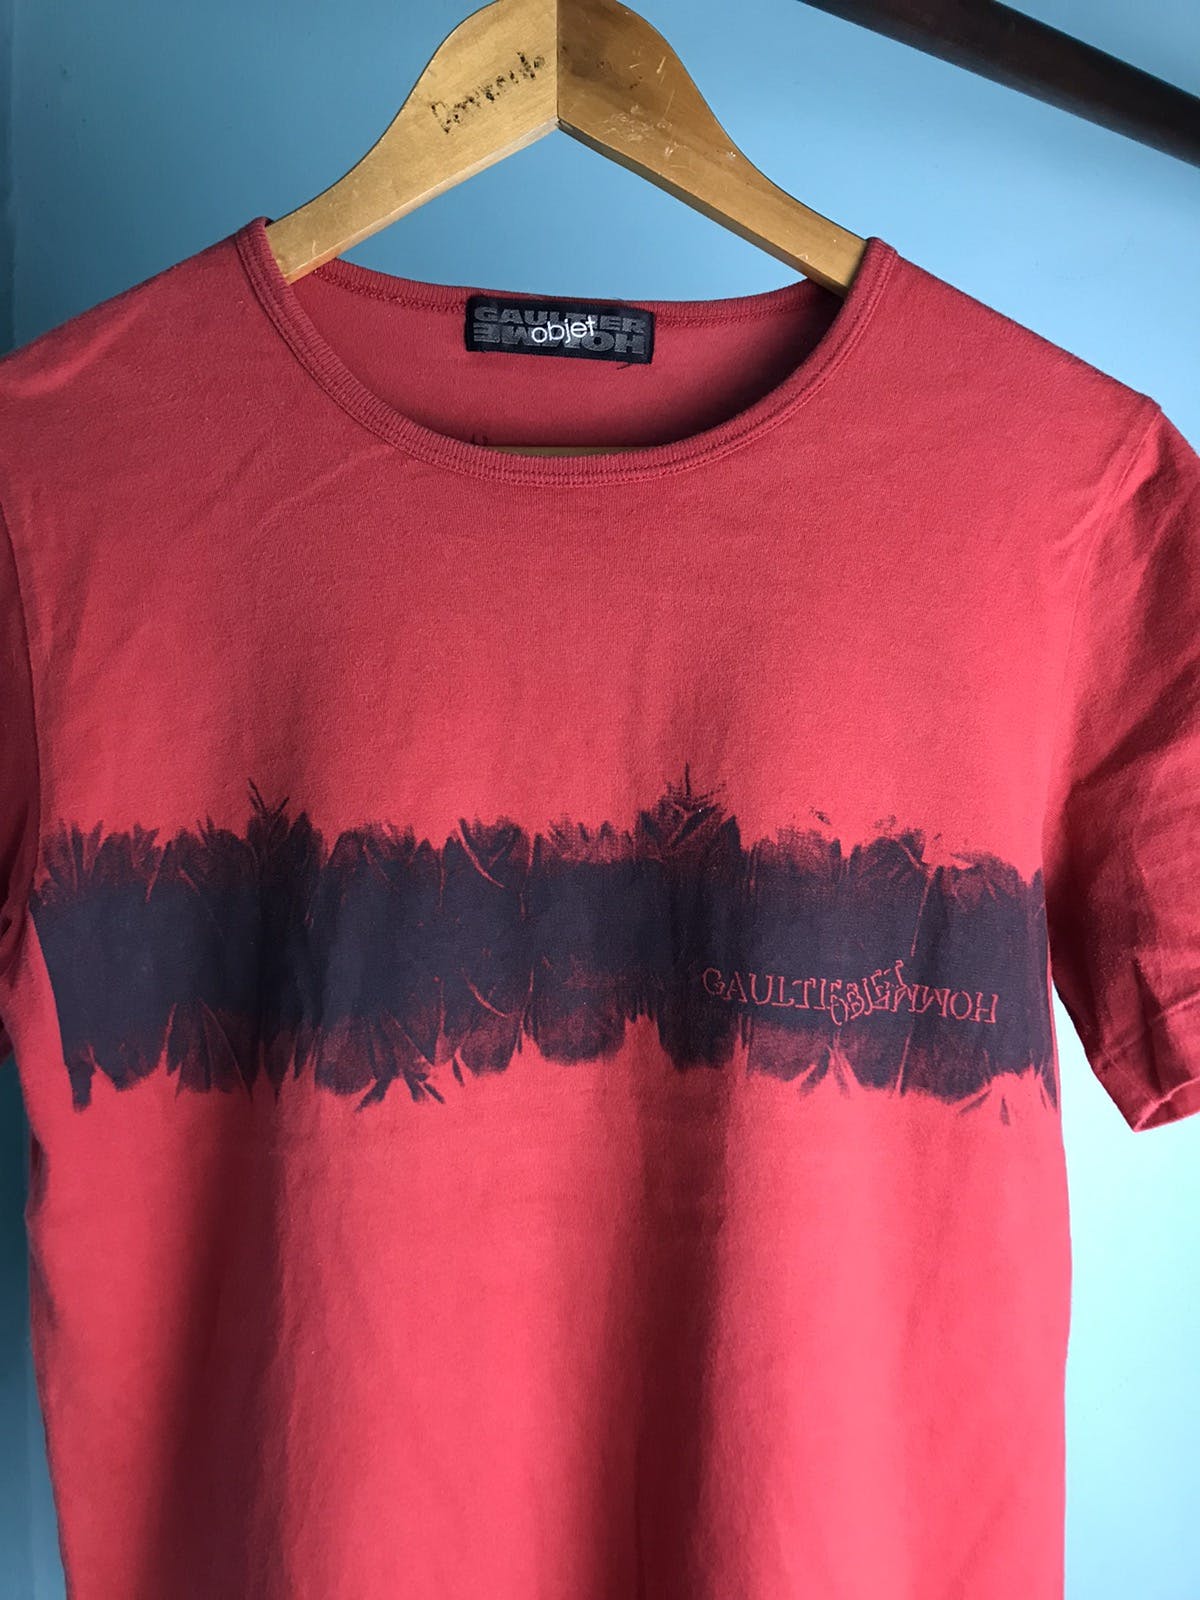 Vintage Gaultier Homme Object tee - 6